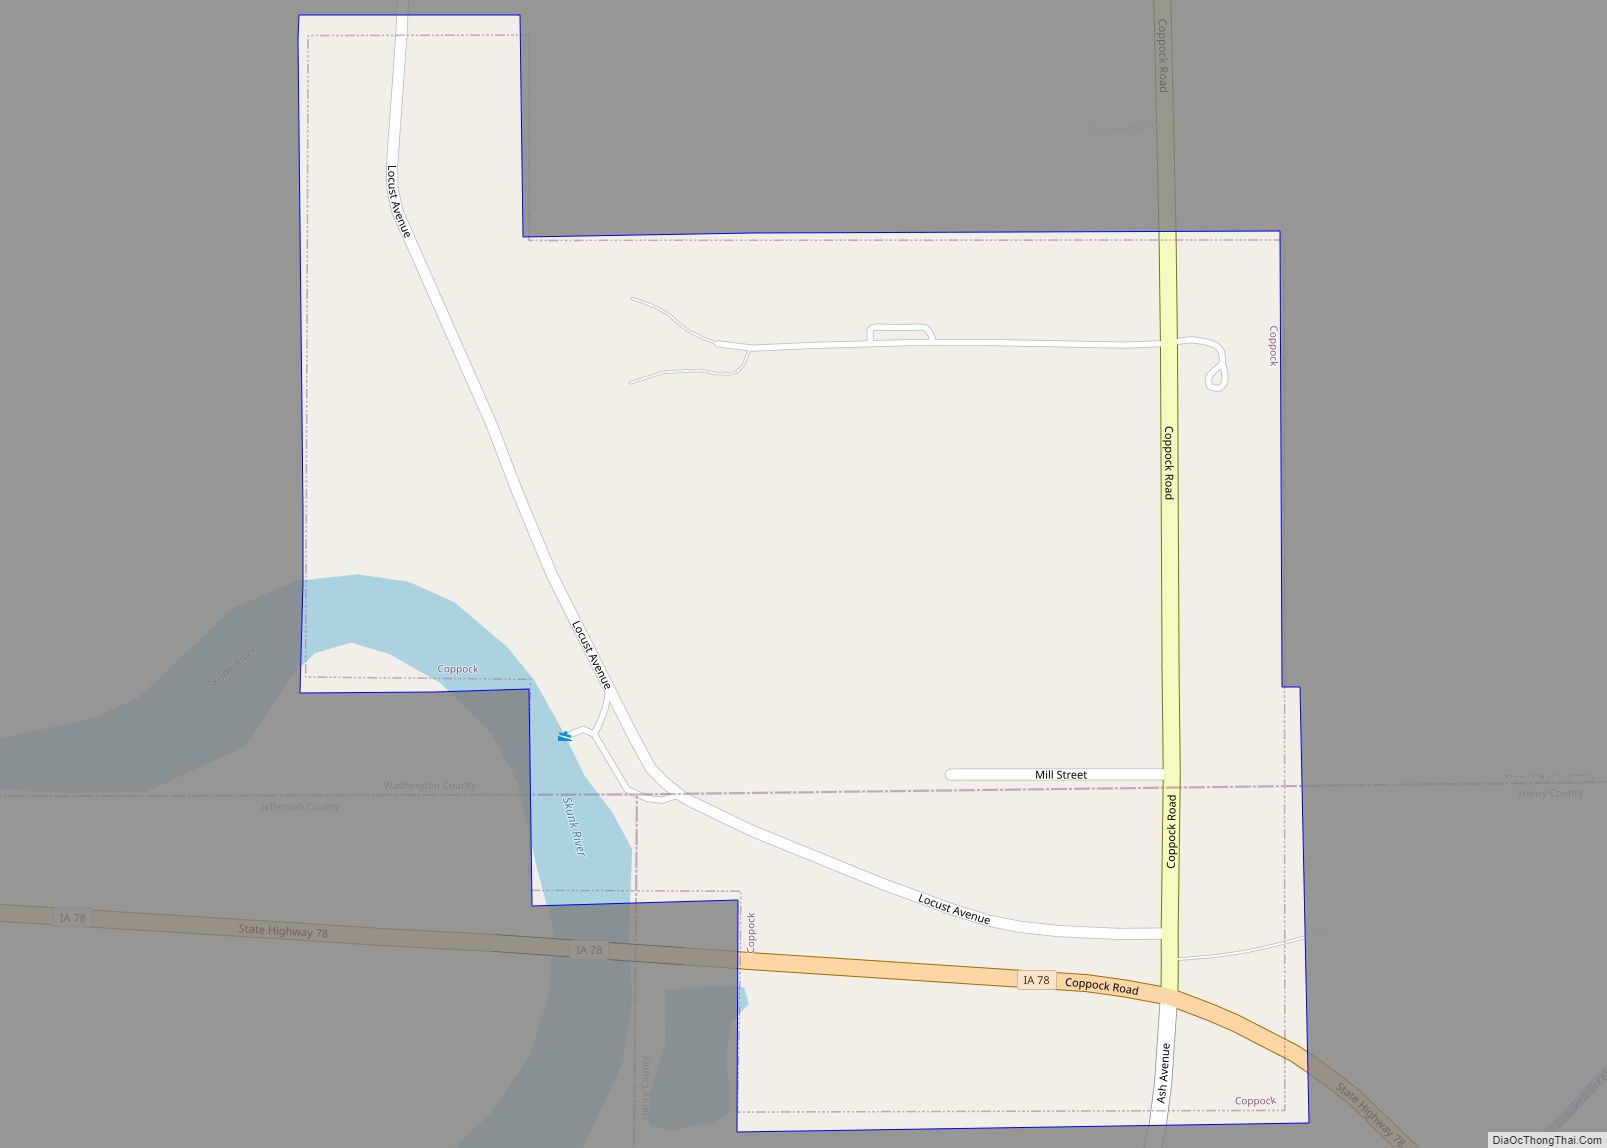 Map of Coppock city